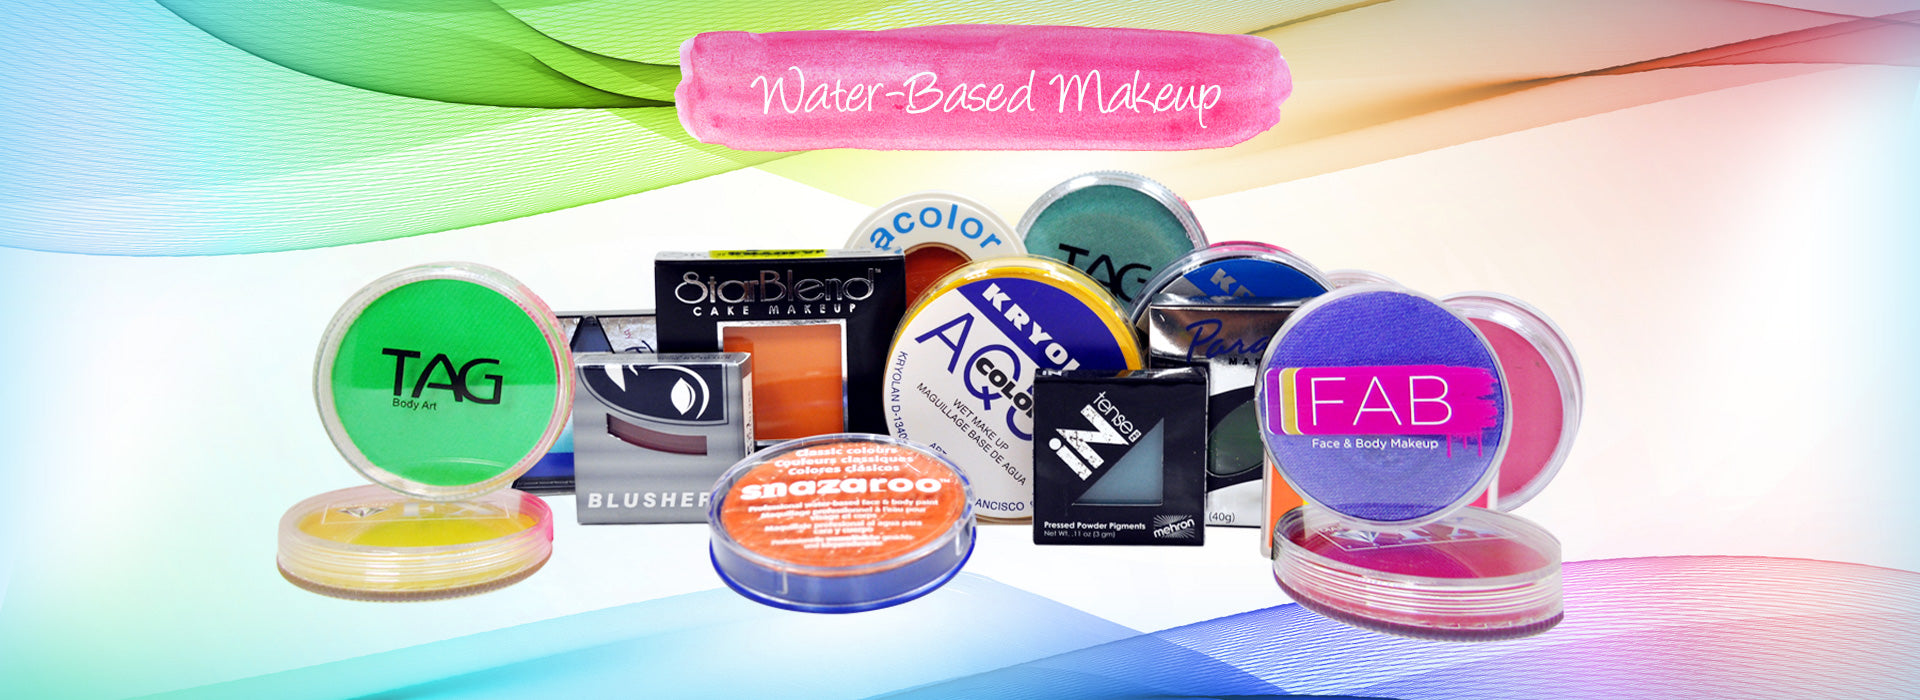 Snazaroo Face Paint - 11 Parts » Fast Shipping » Fashion Online